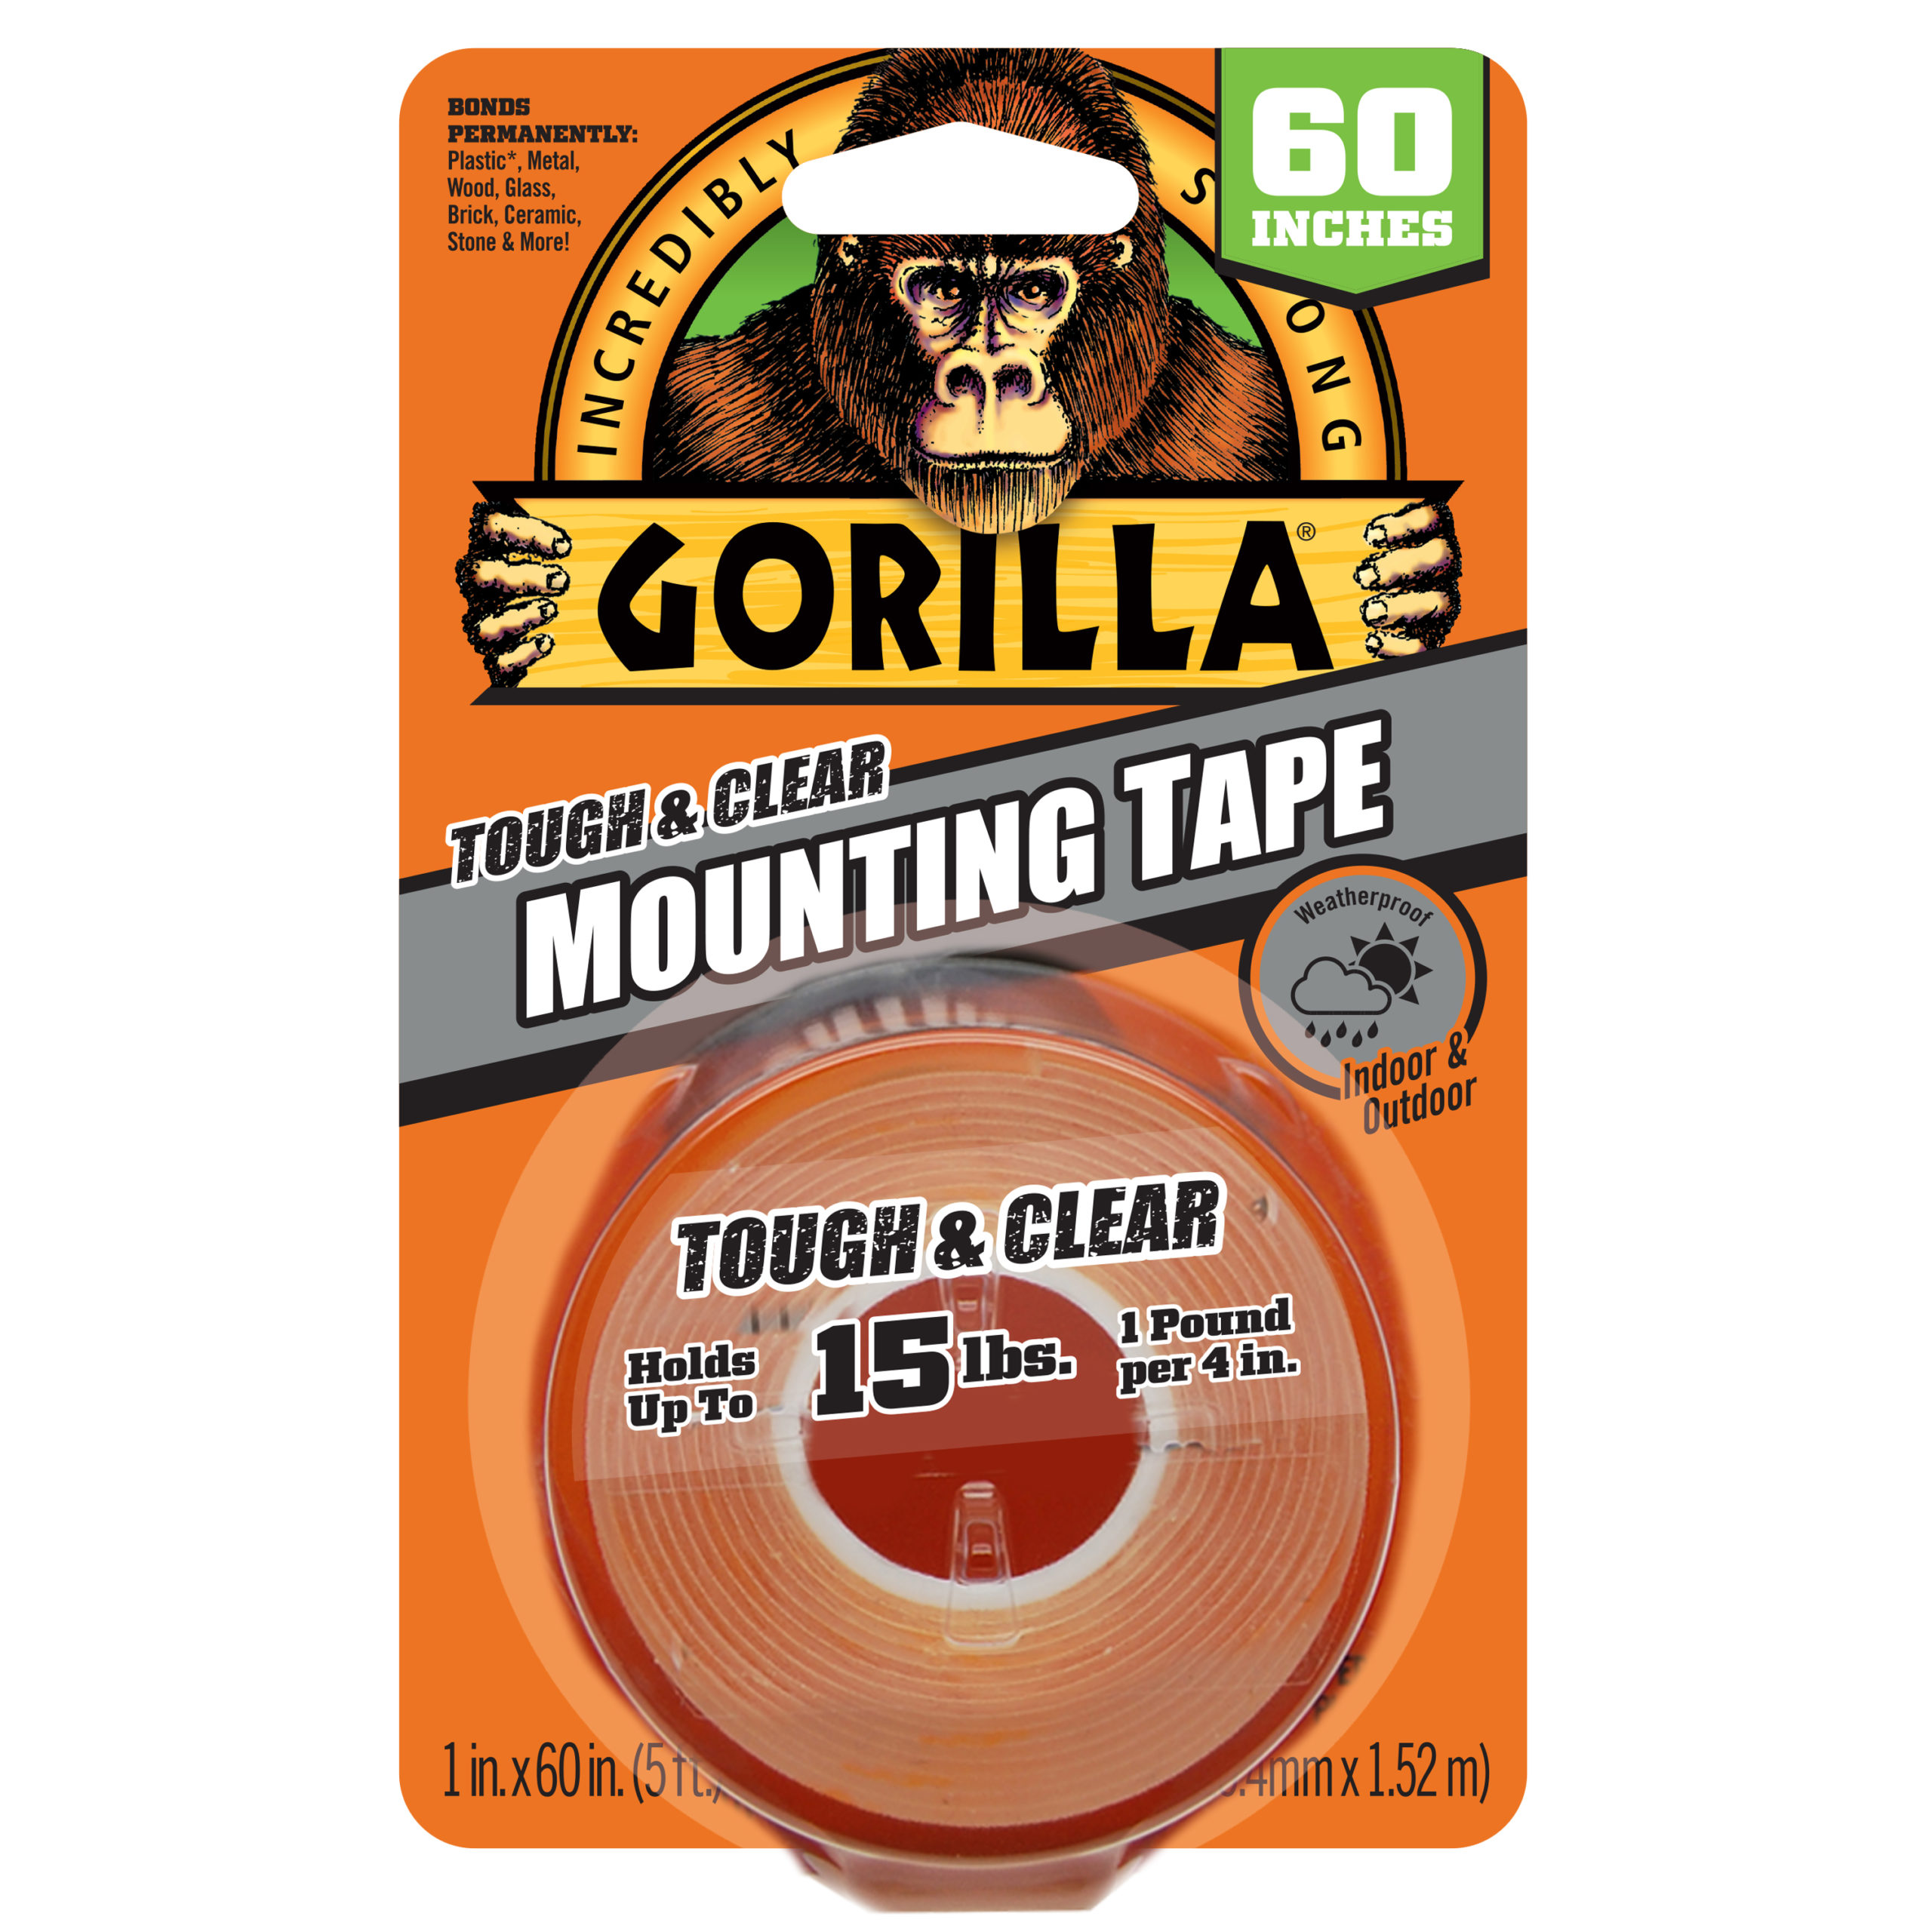 Pack of 1 Gorilla Tough & Clear Double Sided XL Mounting Tape 6036002 New 1 x 150 Clear, 